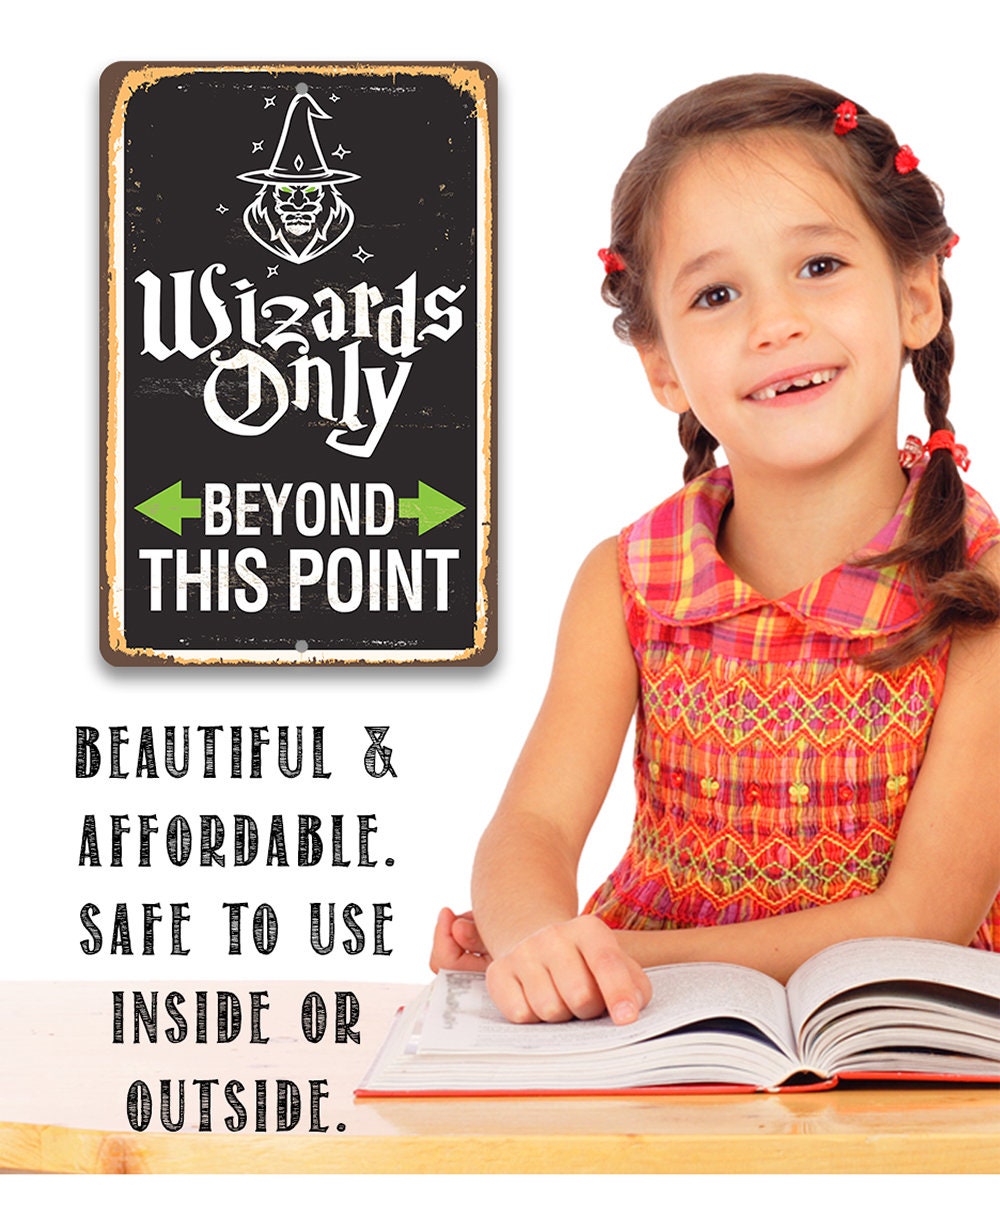 Wizards Only Beyond This Point - Metal Sign Metal Sign Lone Star Art 